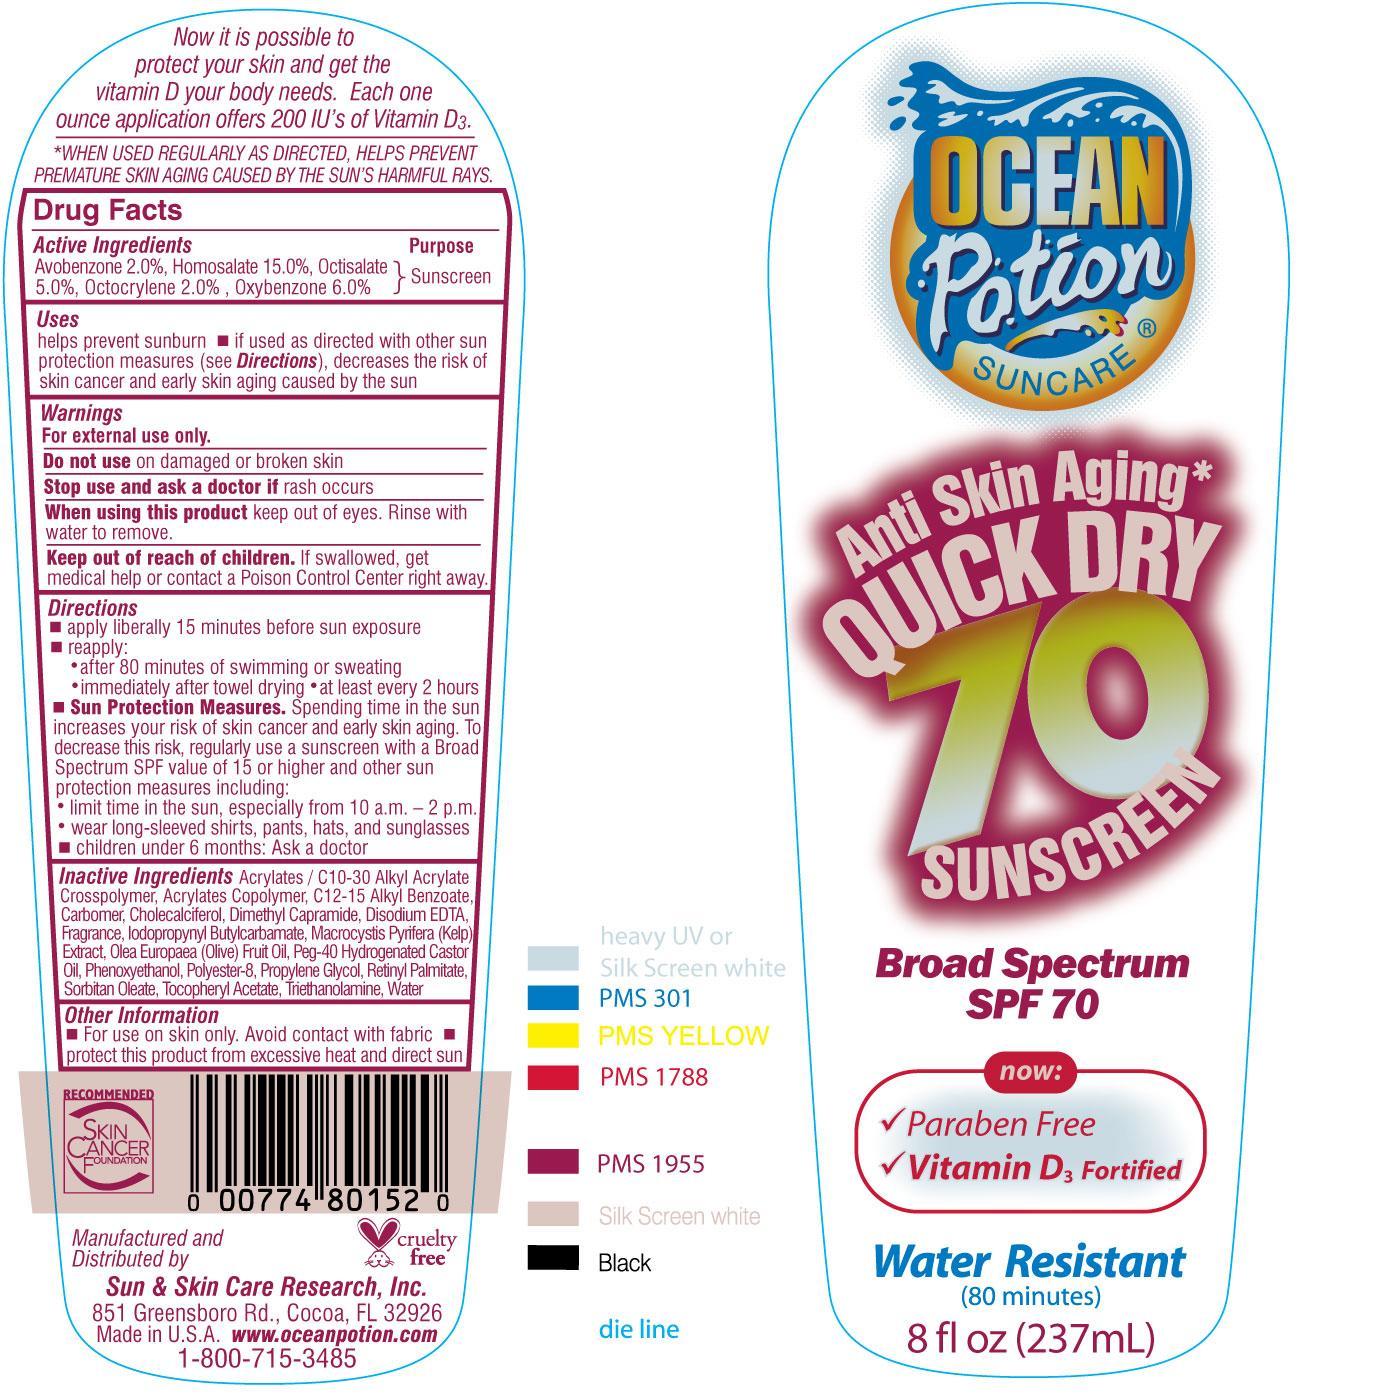 Ocean Potion Quick Dry Spf 70 Sunscreen while Breastfeeding